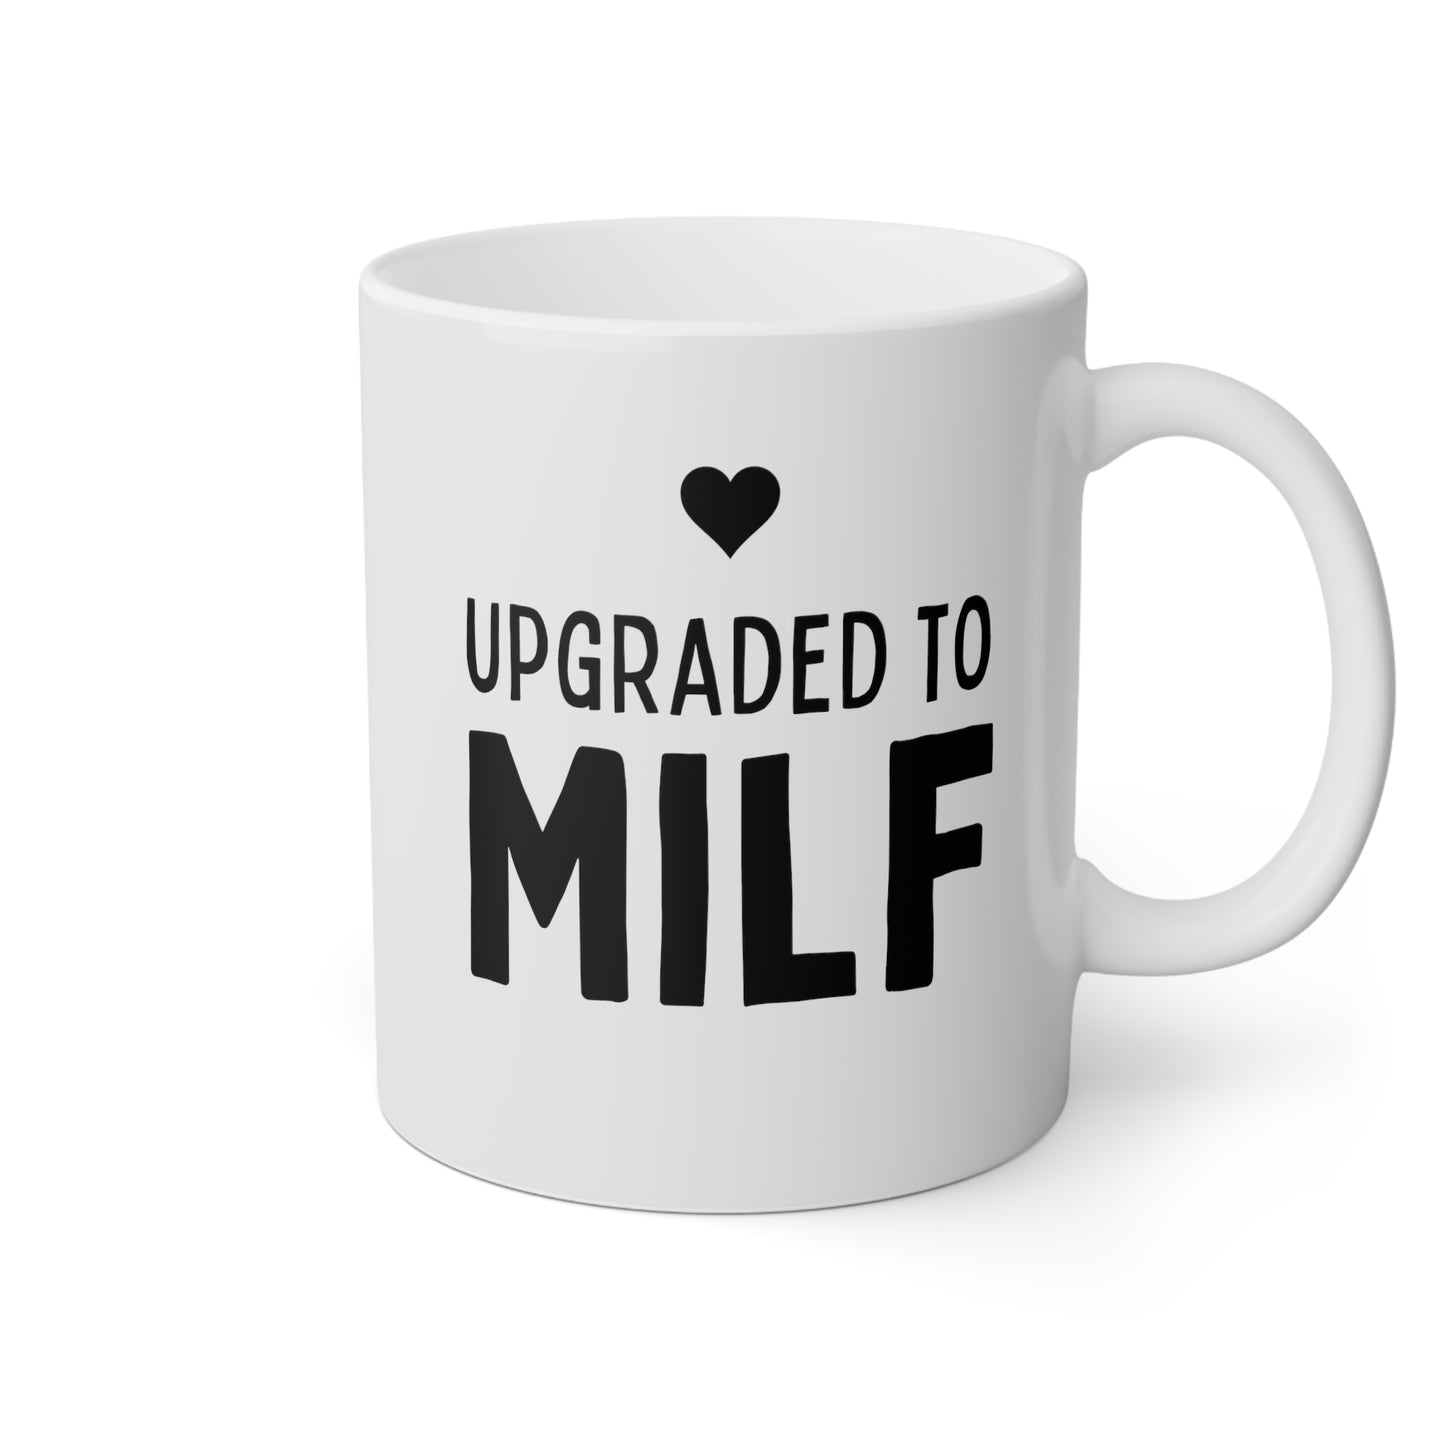 Upgraded to MILF 11oz white Funny large Coffee Mug gift for mothers day expecting mom new mom pregnancy announcement baby shower waveywares wavey wares wavywares wavy wares